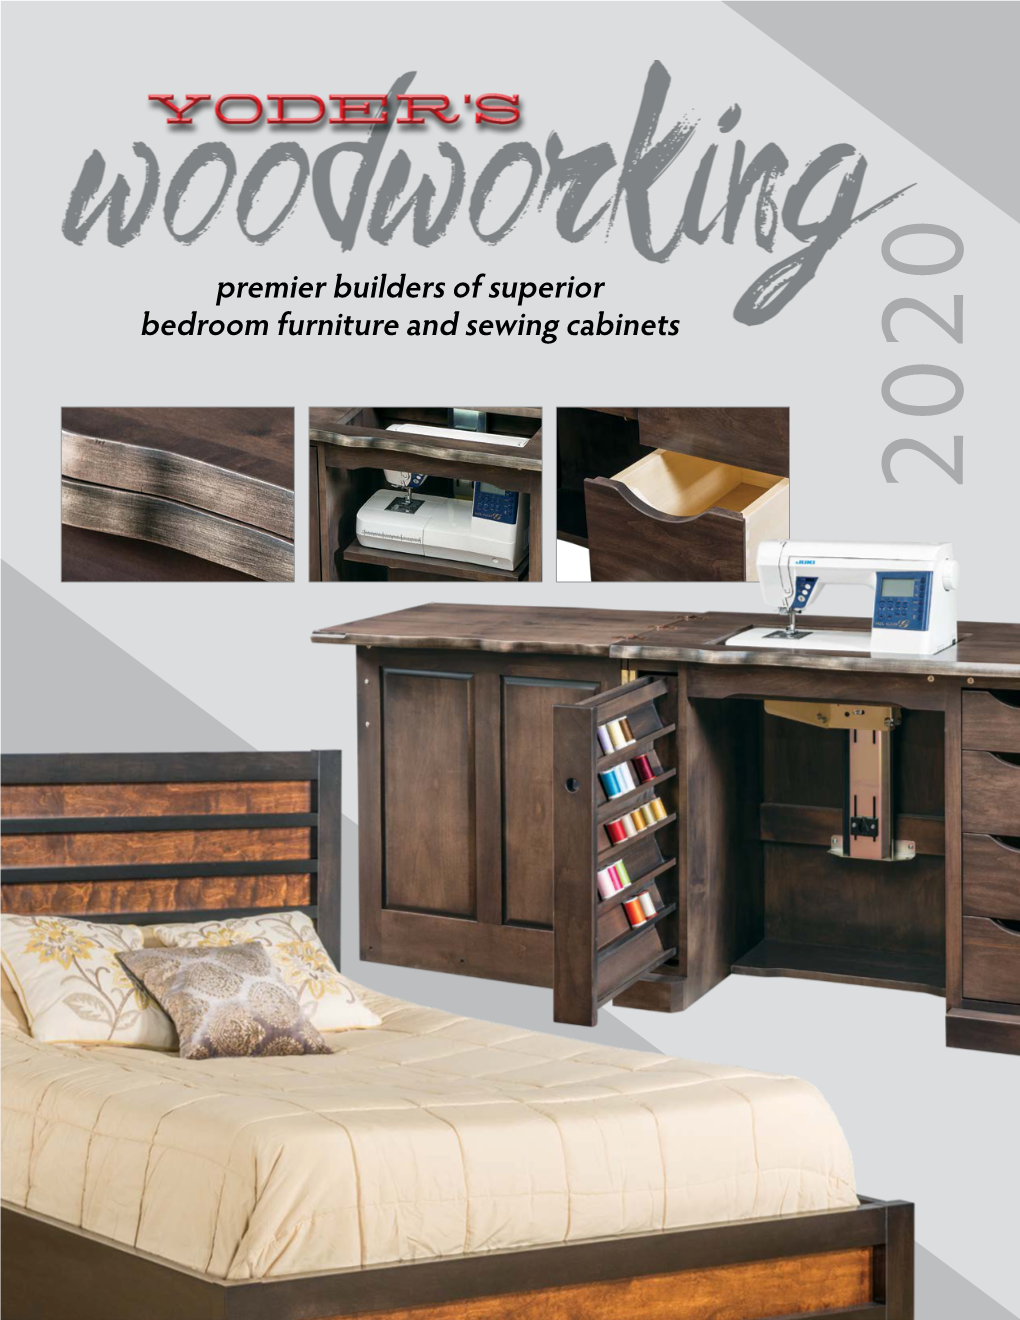 Premier Builders of Superior Bedroom Furniture and Sewing Cabinets